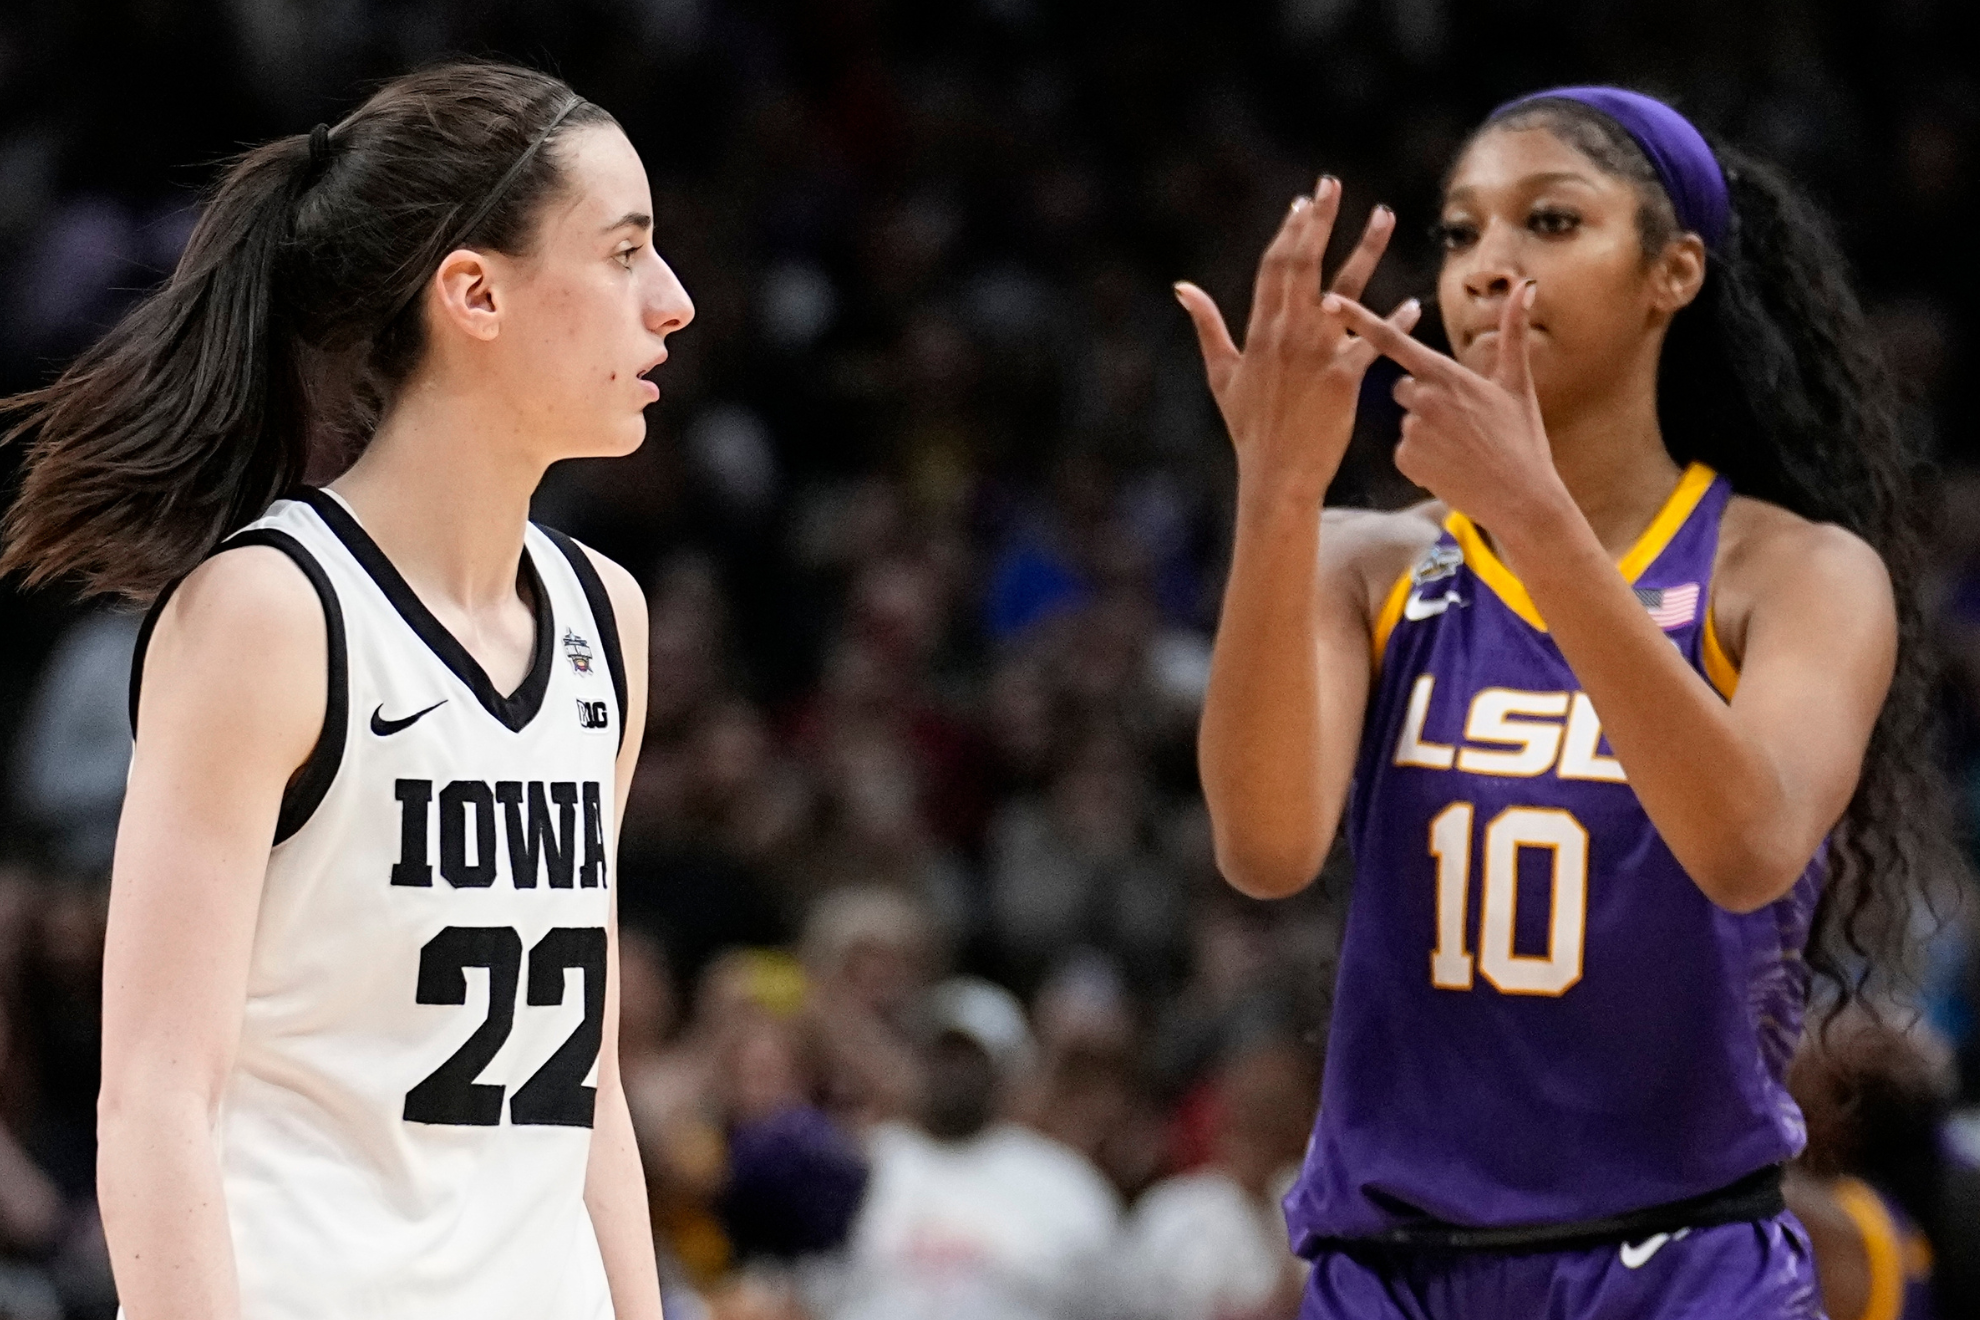 From college to the pros: Clark and Reese are officially WNBA-bound.